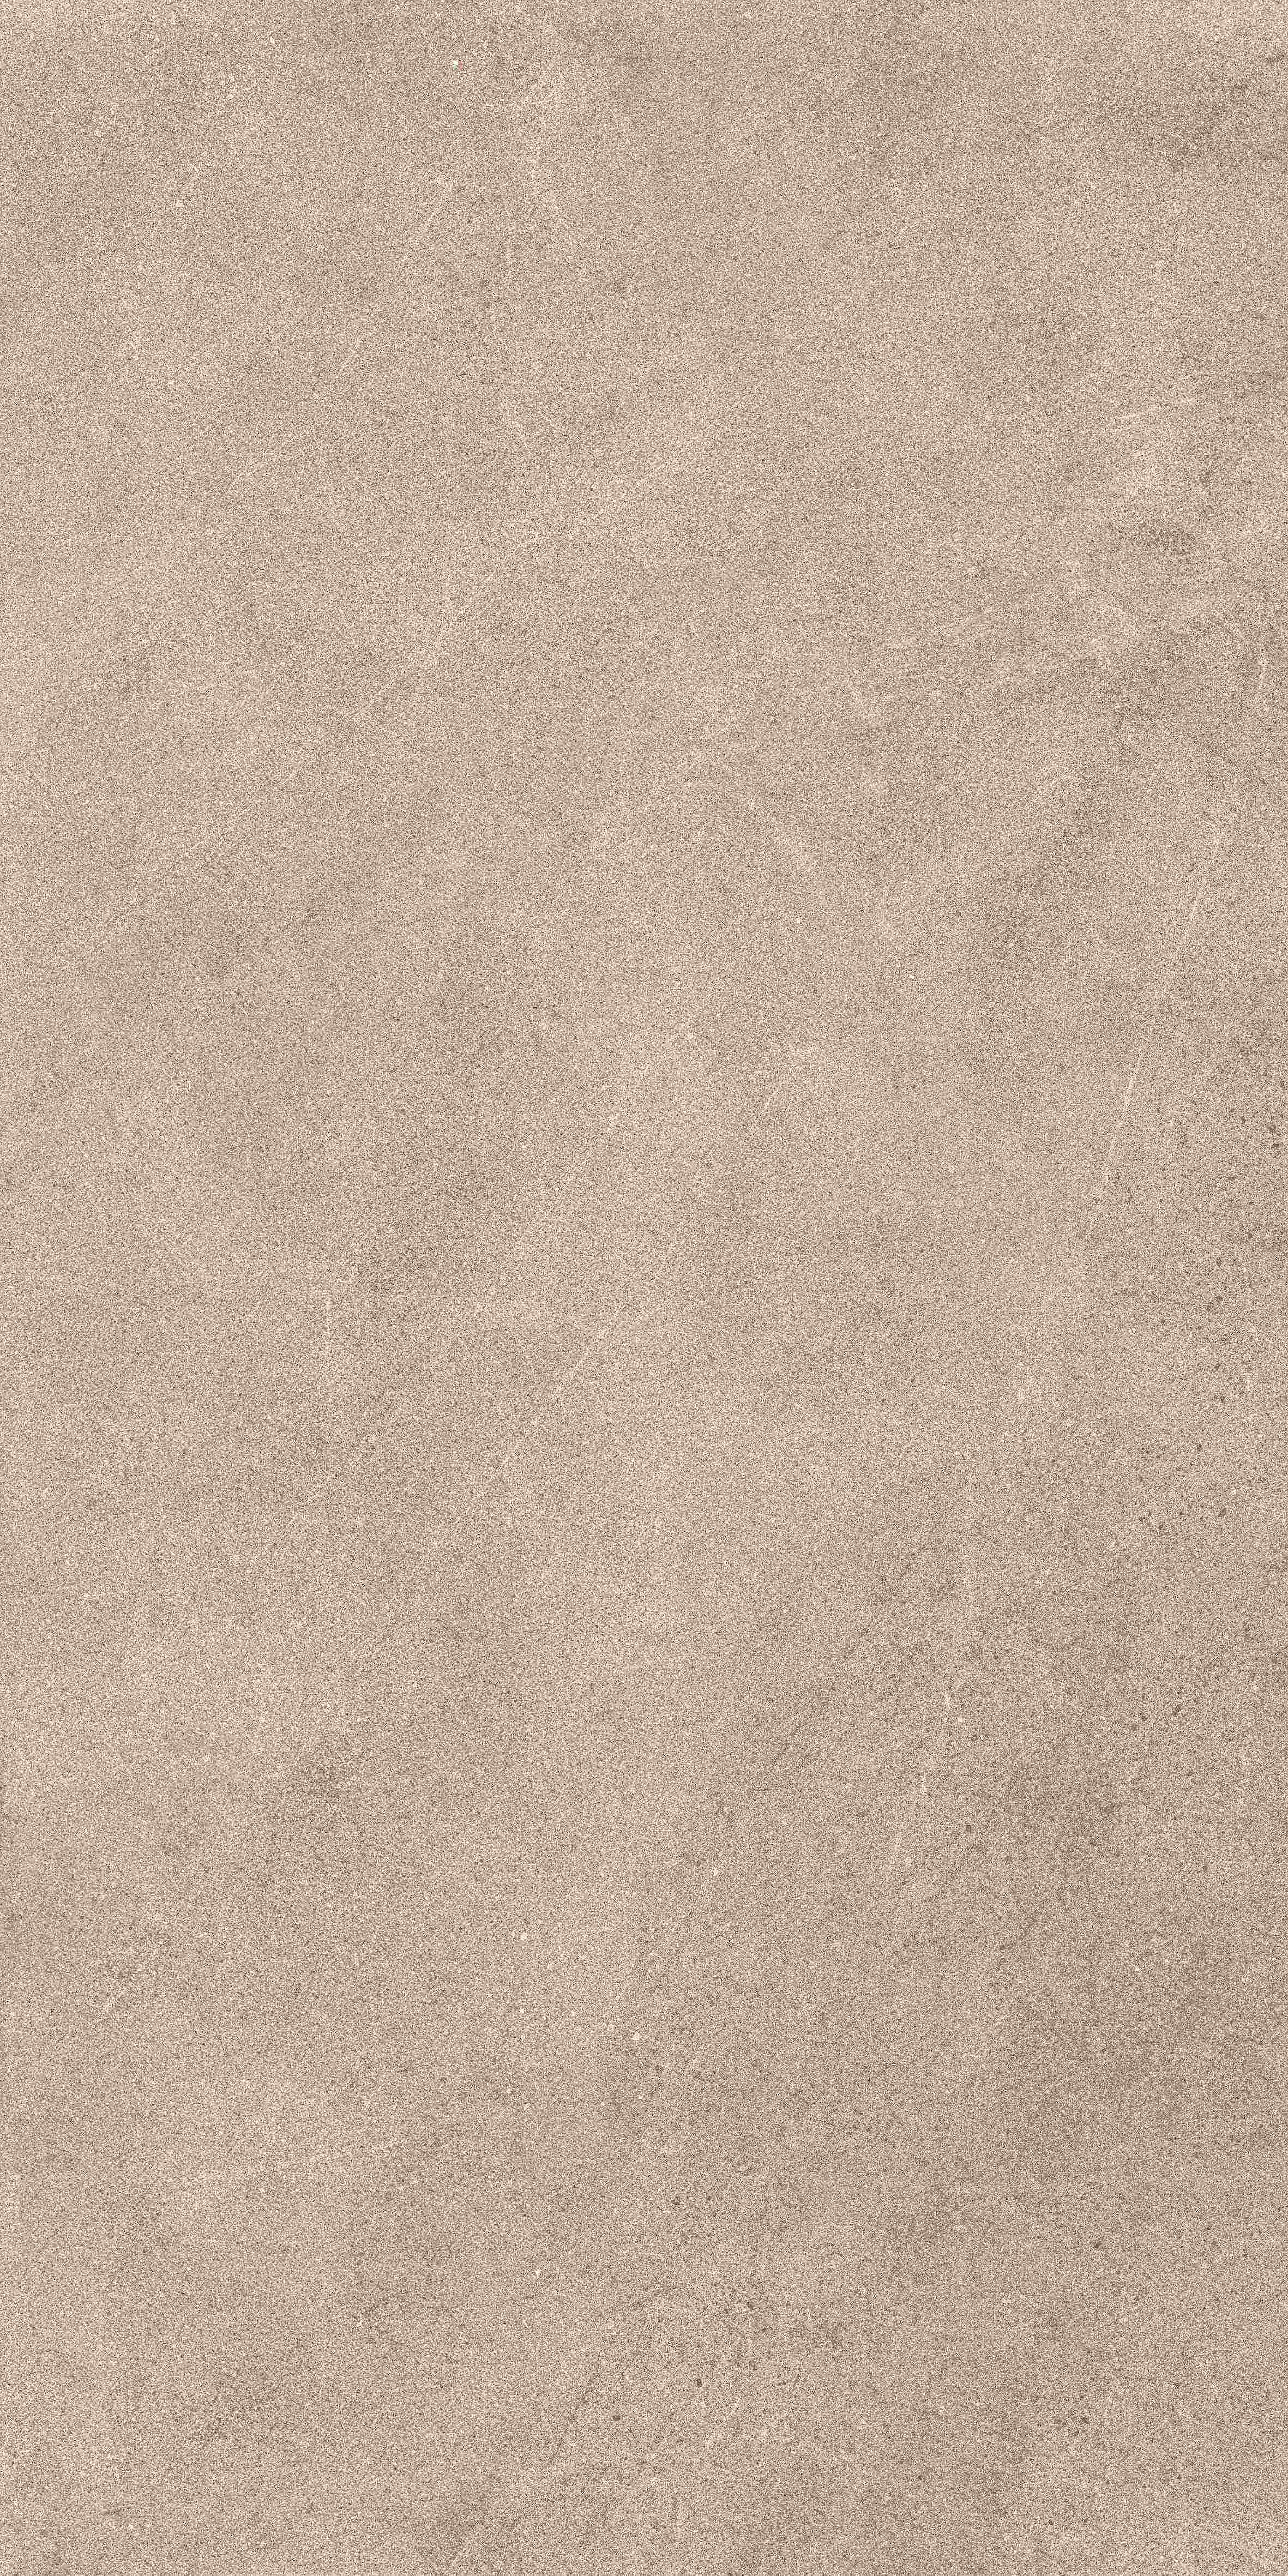 Lea Nextone Taupe Lappato – Antibacterial LGXNXL2 60x120cm rectified 9,5mm